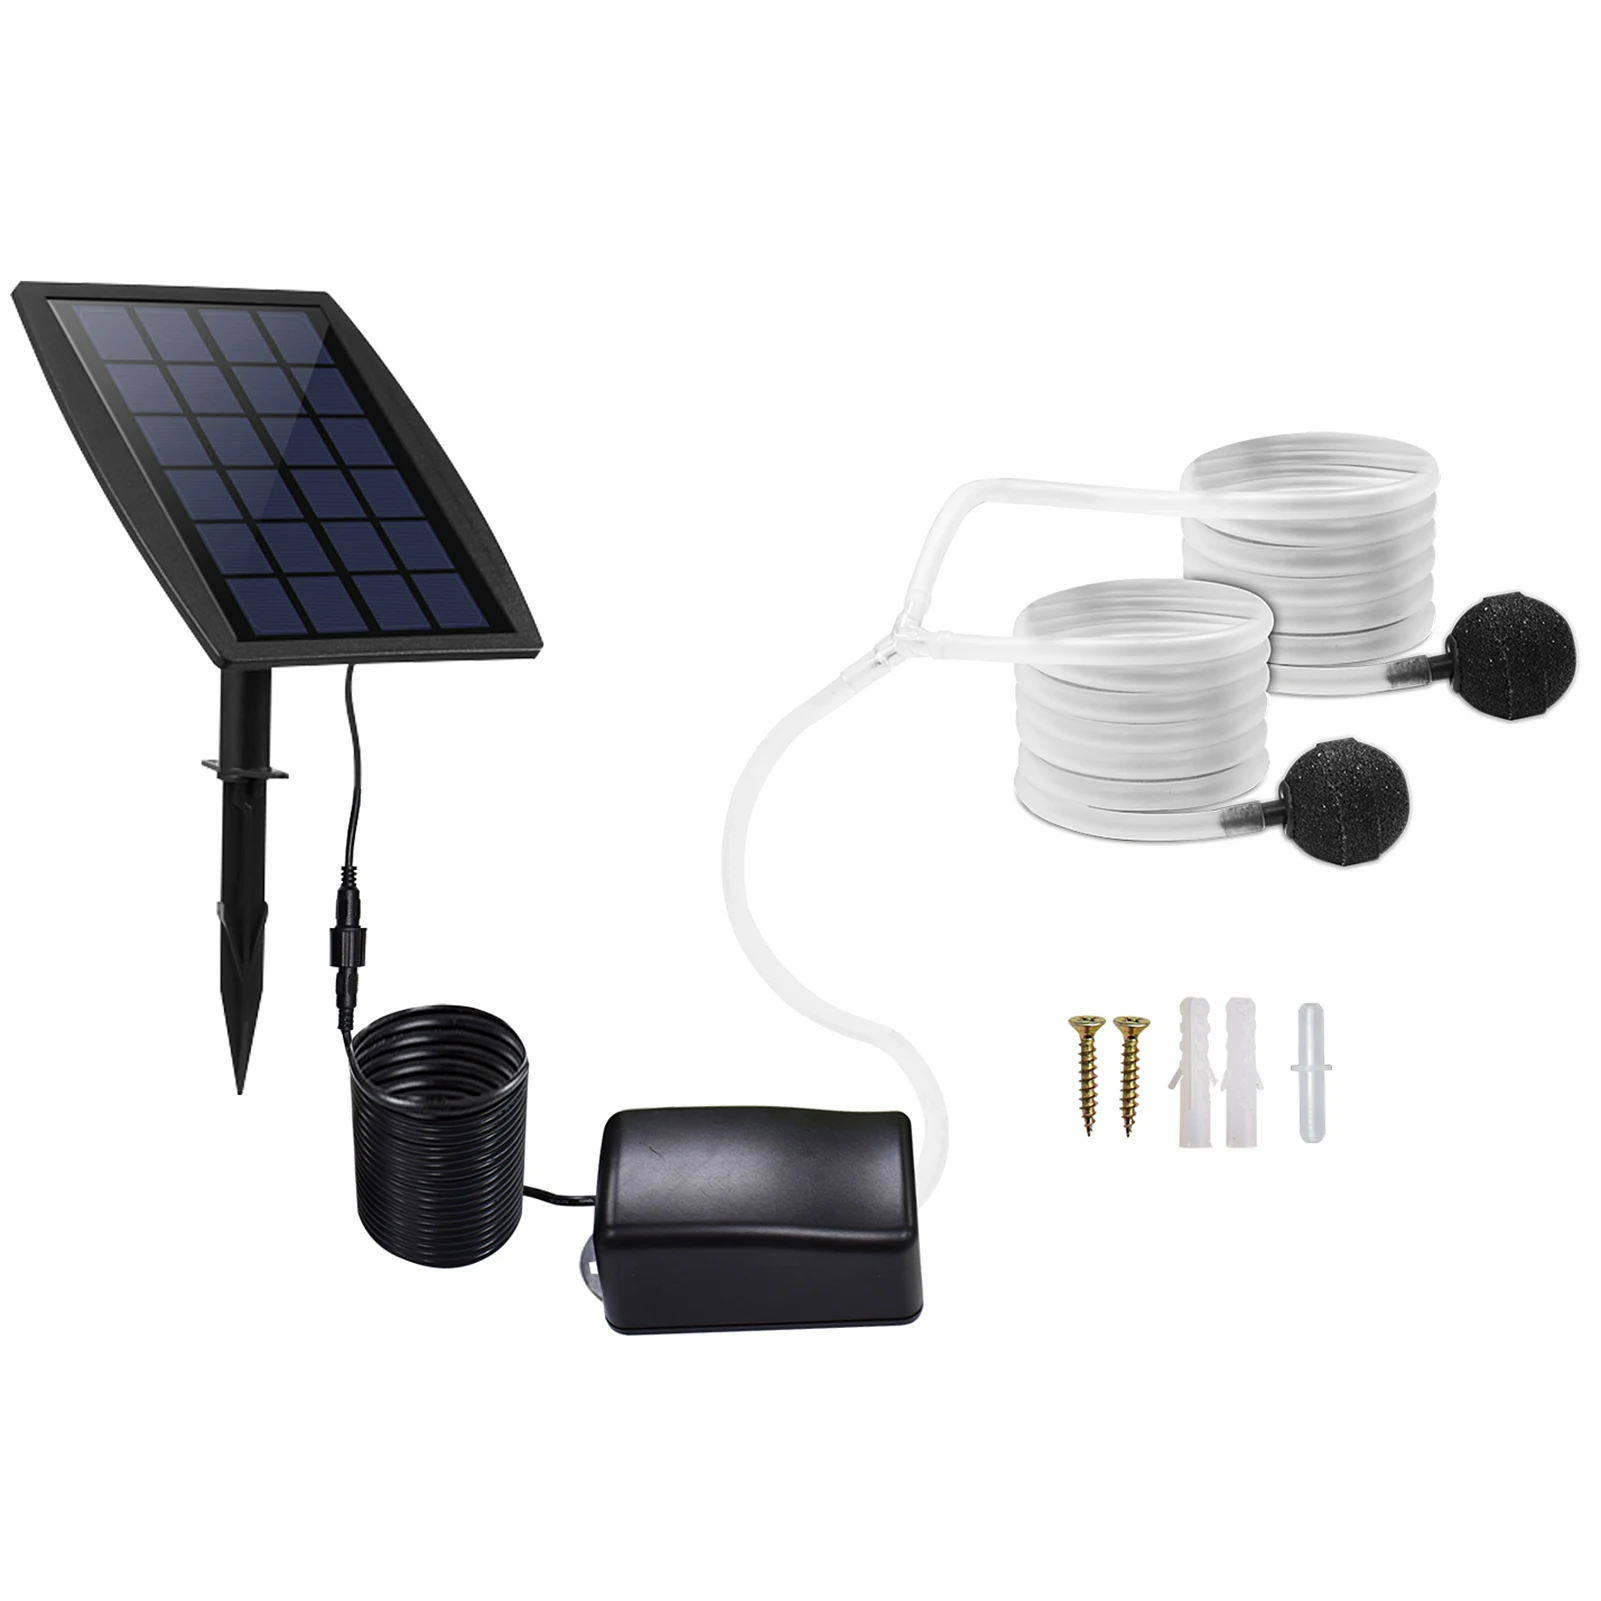 

Solar Powered Air Pump Solar Air Pump Kit 2.5w Air Pump With Air Hoses And Bubble Stones 3 Working Modes Pond Aerator Oxygenator